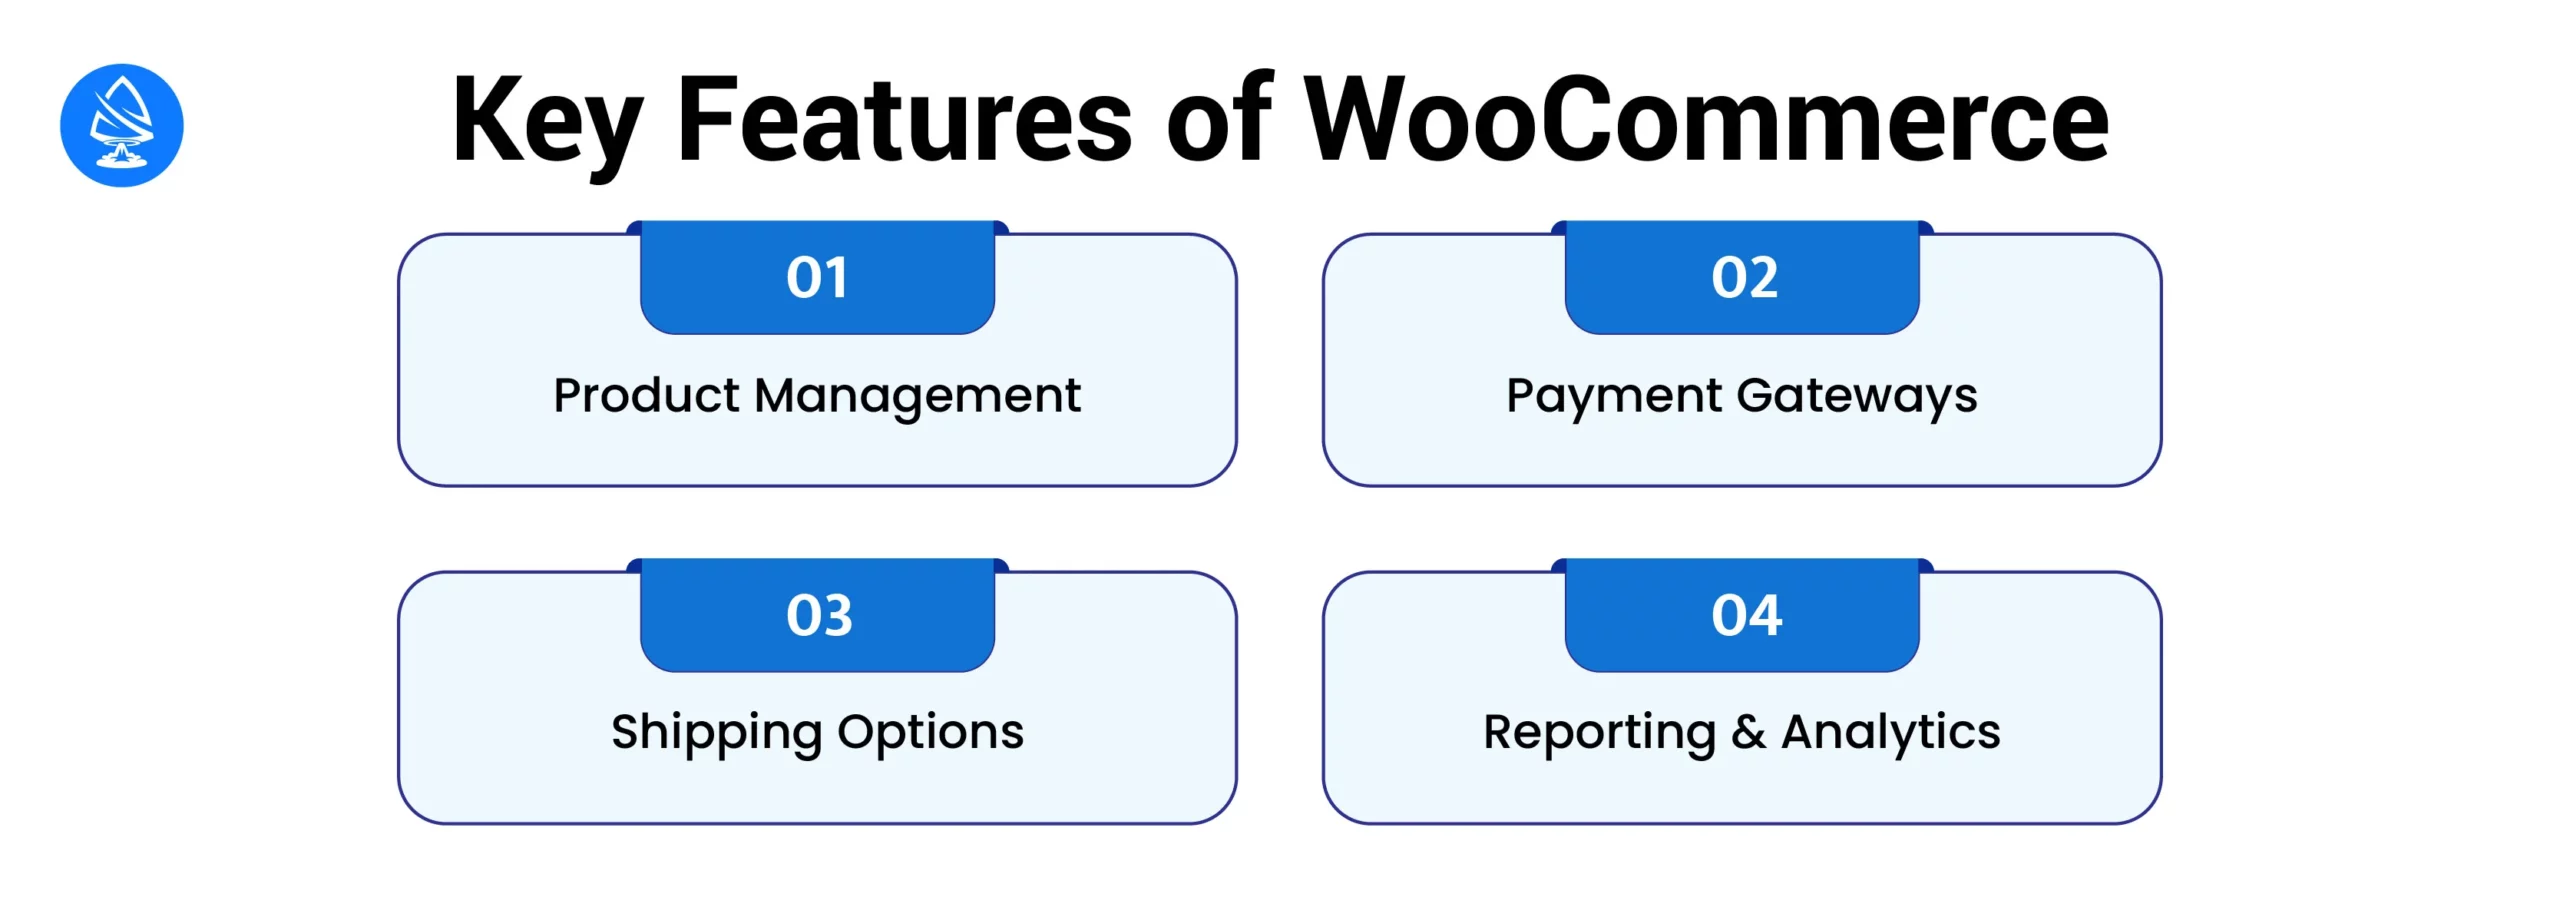 Key Features of Woo Commerce